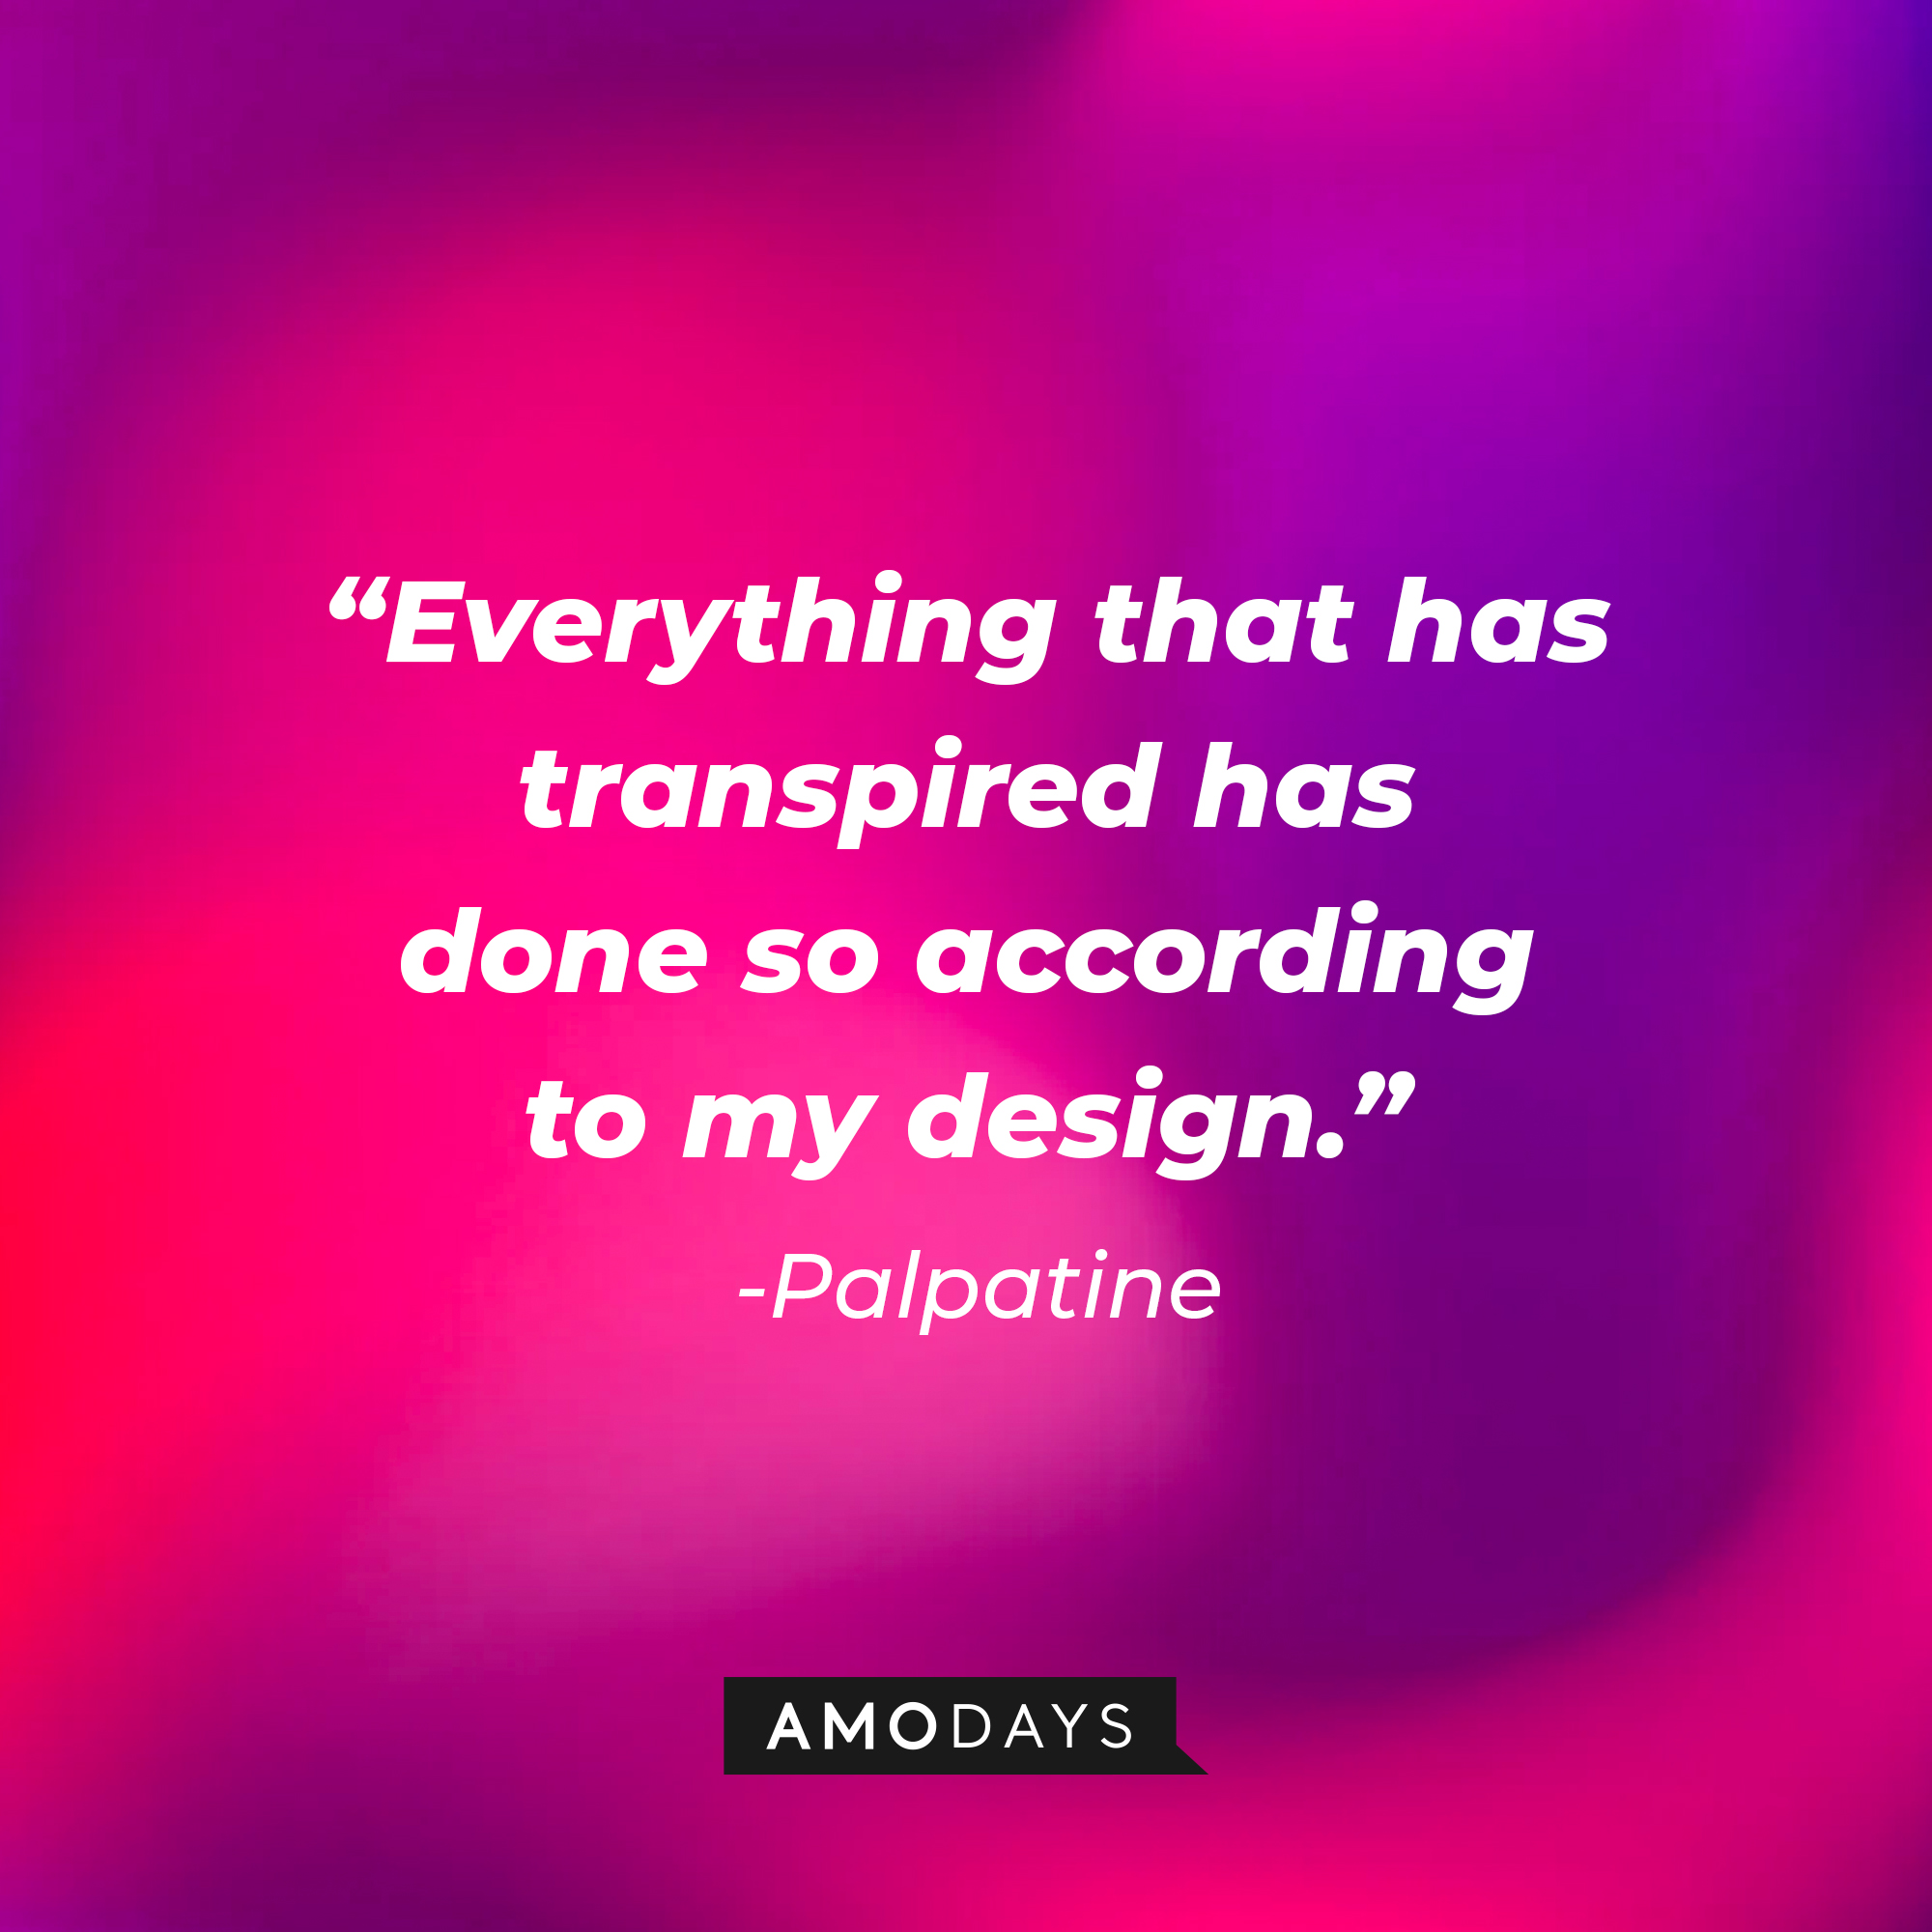 Palpatine’s quote: “Everything that has transpired has done so according to my design.” | Source: AmoDays